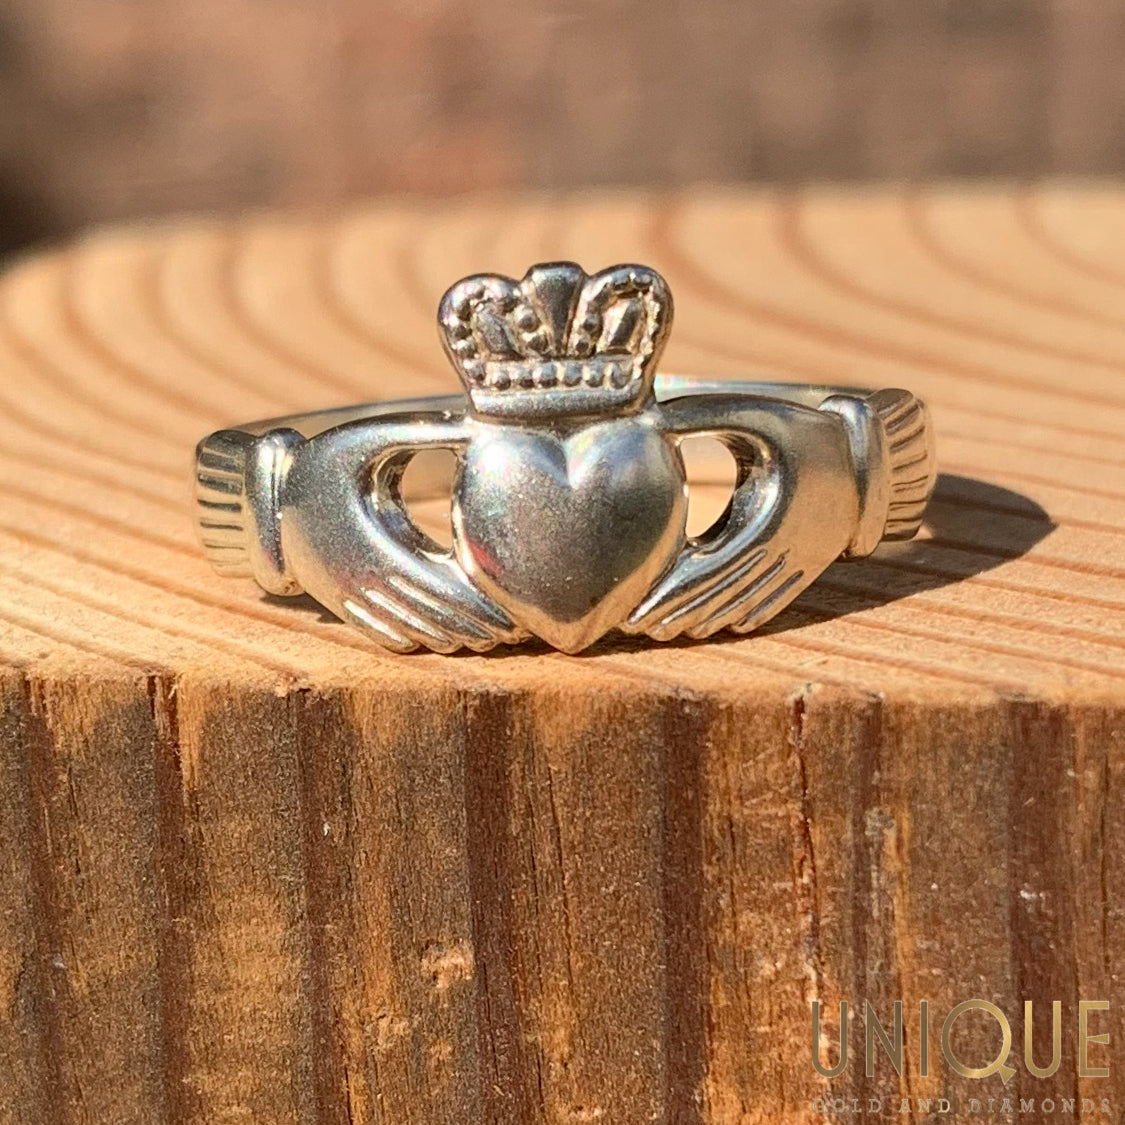 Irish Silver Gold Wedding Ring - Celtic Knots - Silver with10K Trim